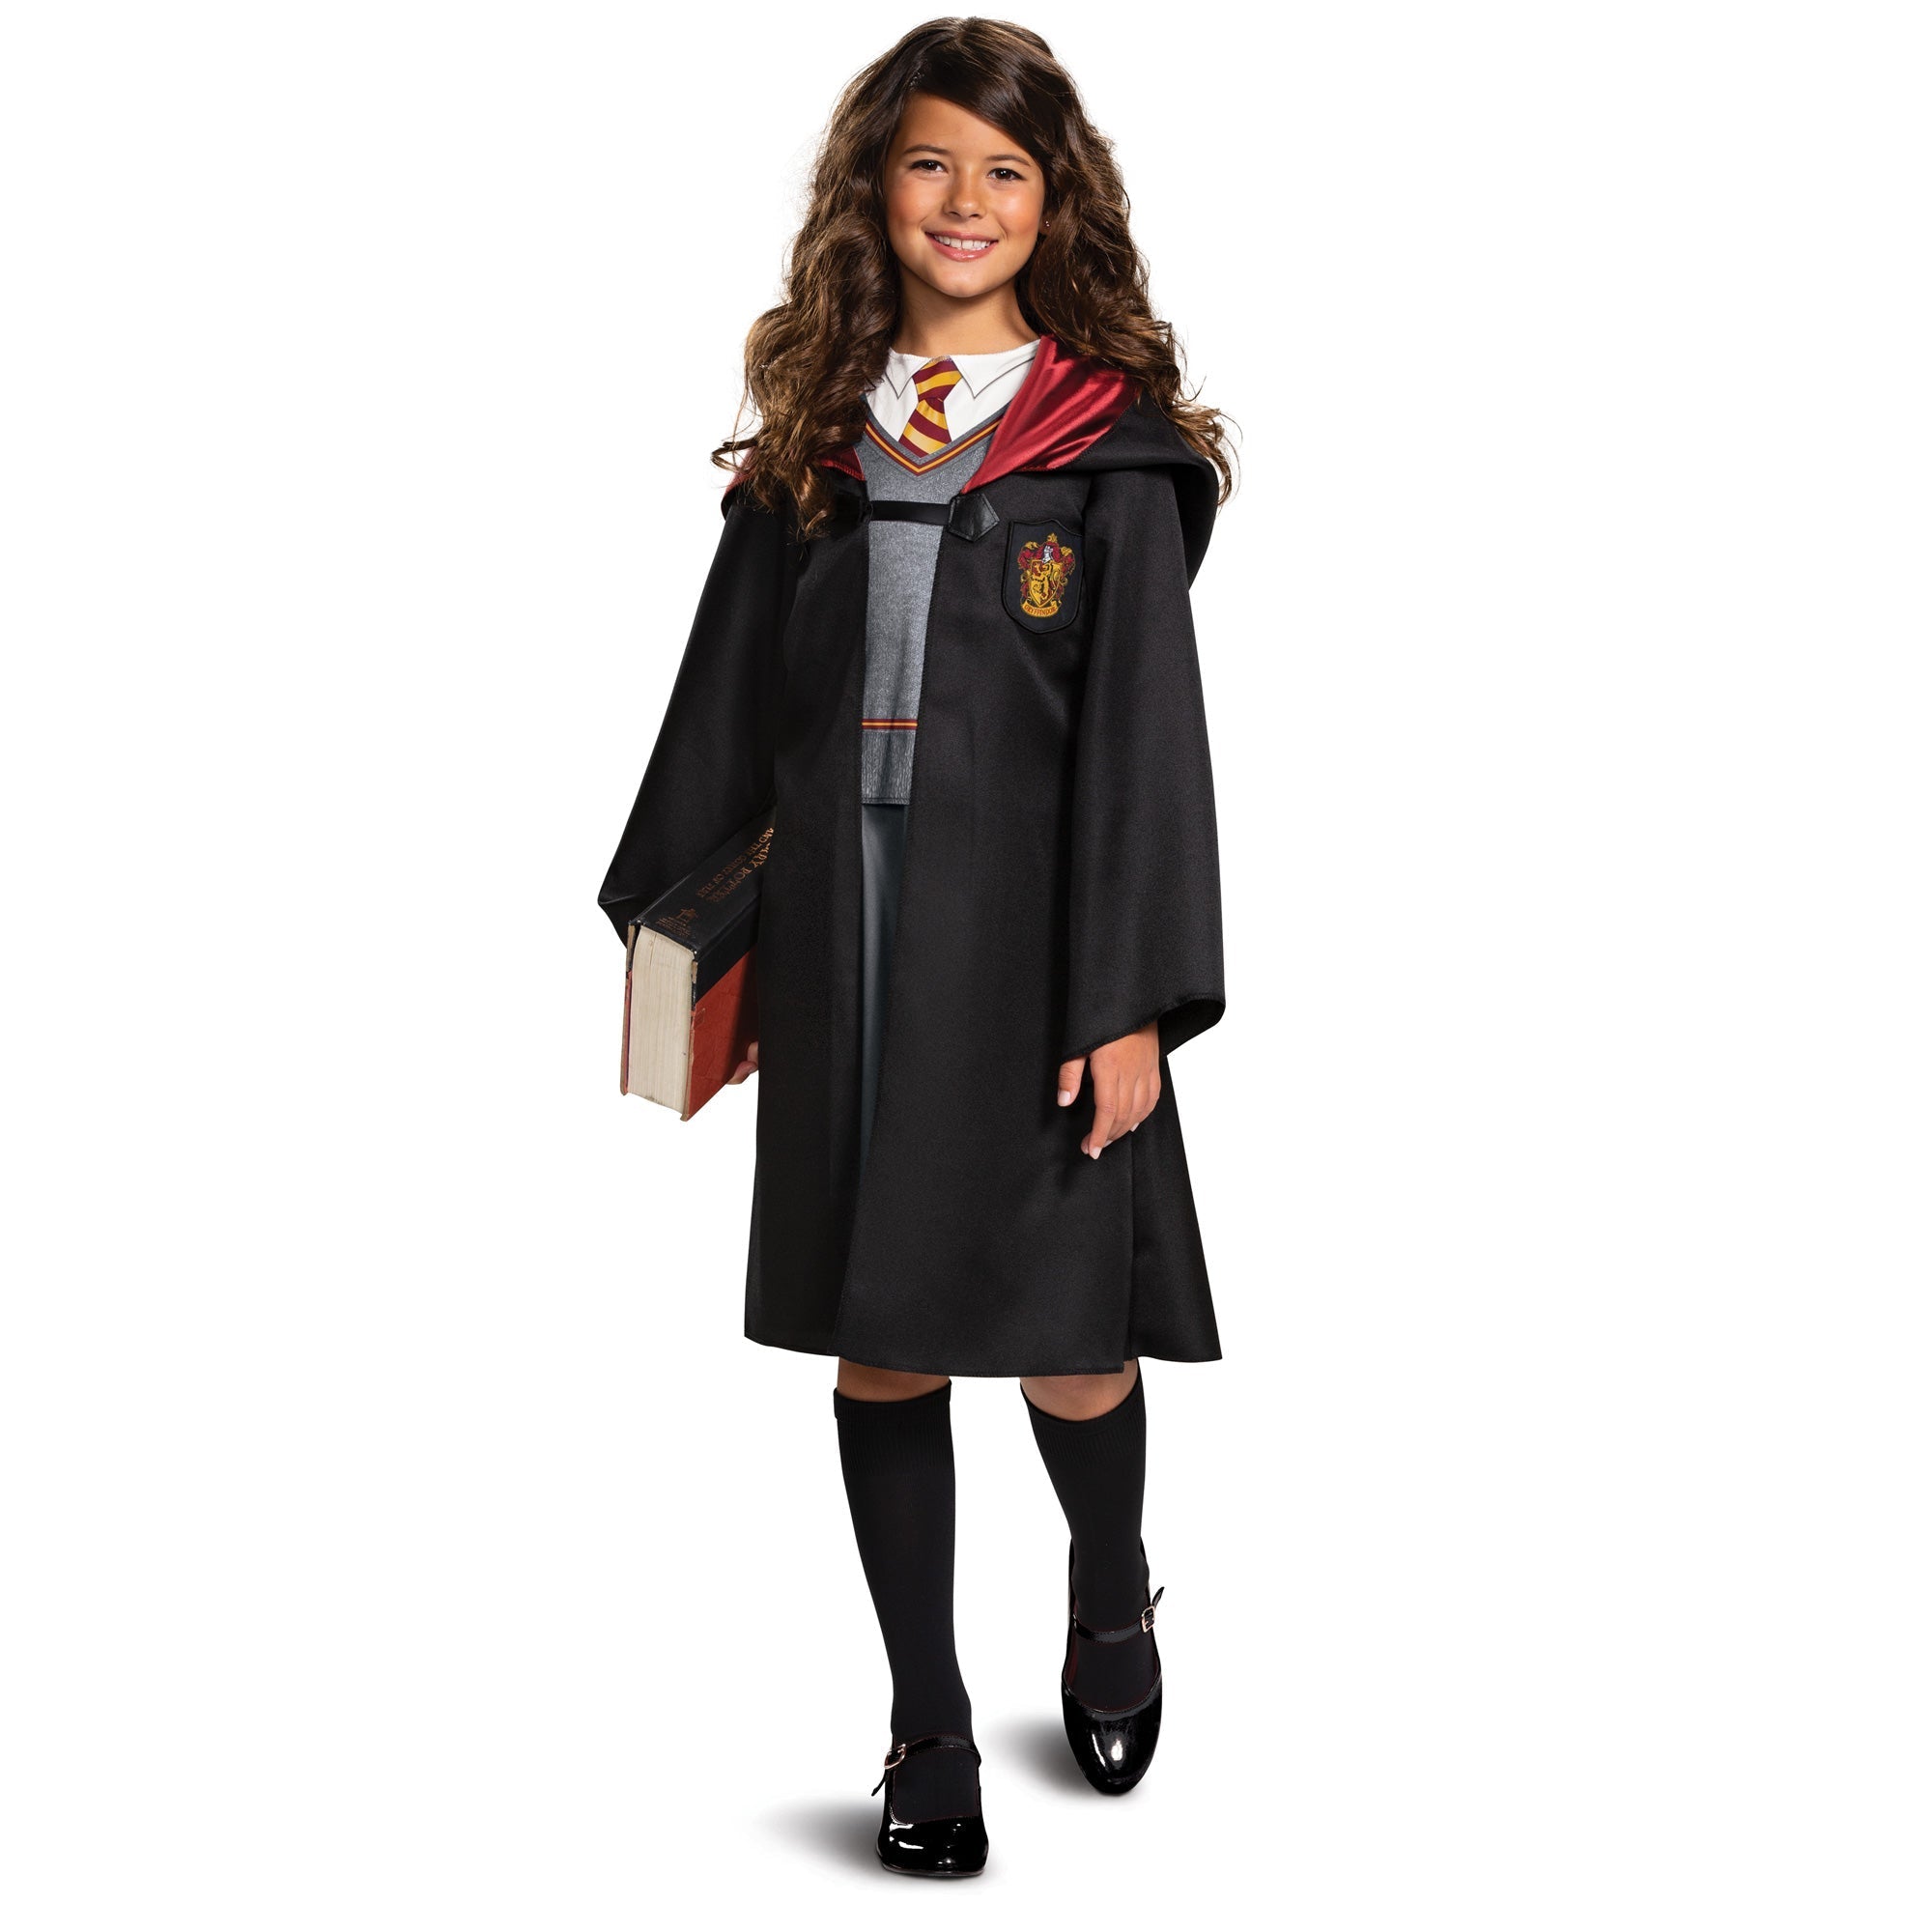 Harry Potter Party Supplies and Birthday Decorations - Party Expert